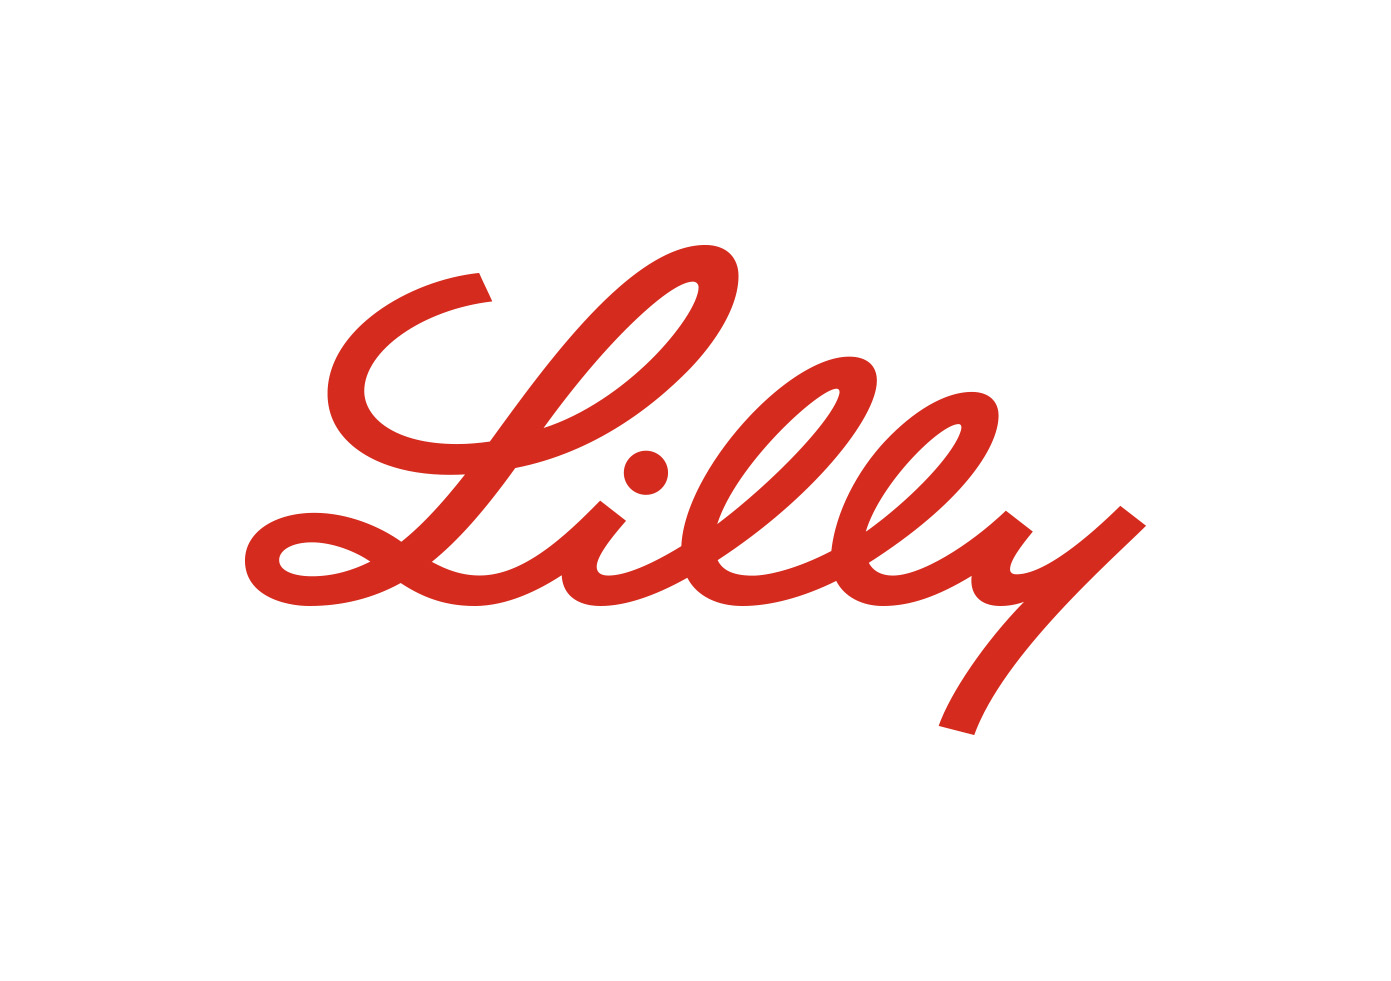 Lilly to supply 388,000 doses of etesevimab to U.S. government for treatment of COVID-19 | Eli Lilly and Company